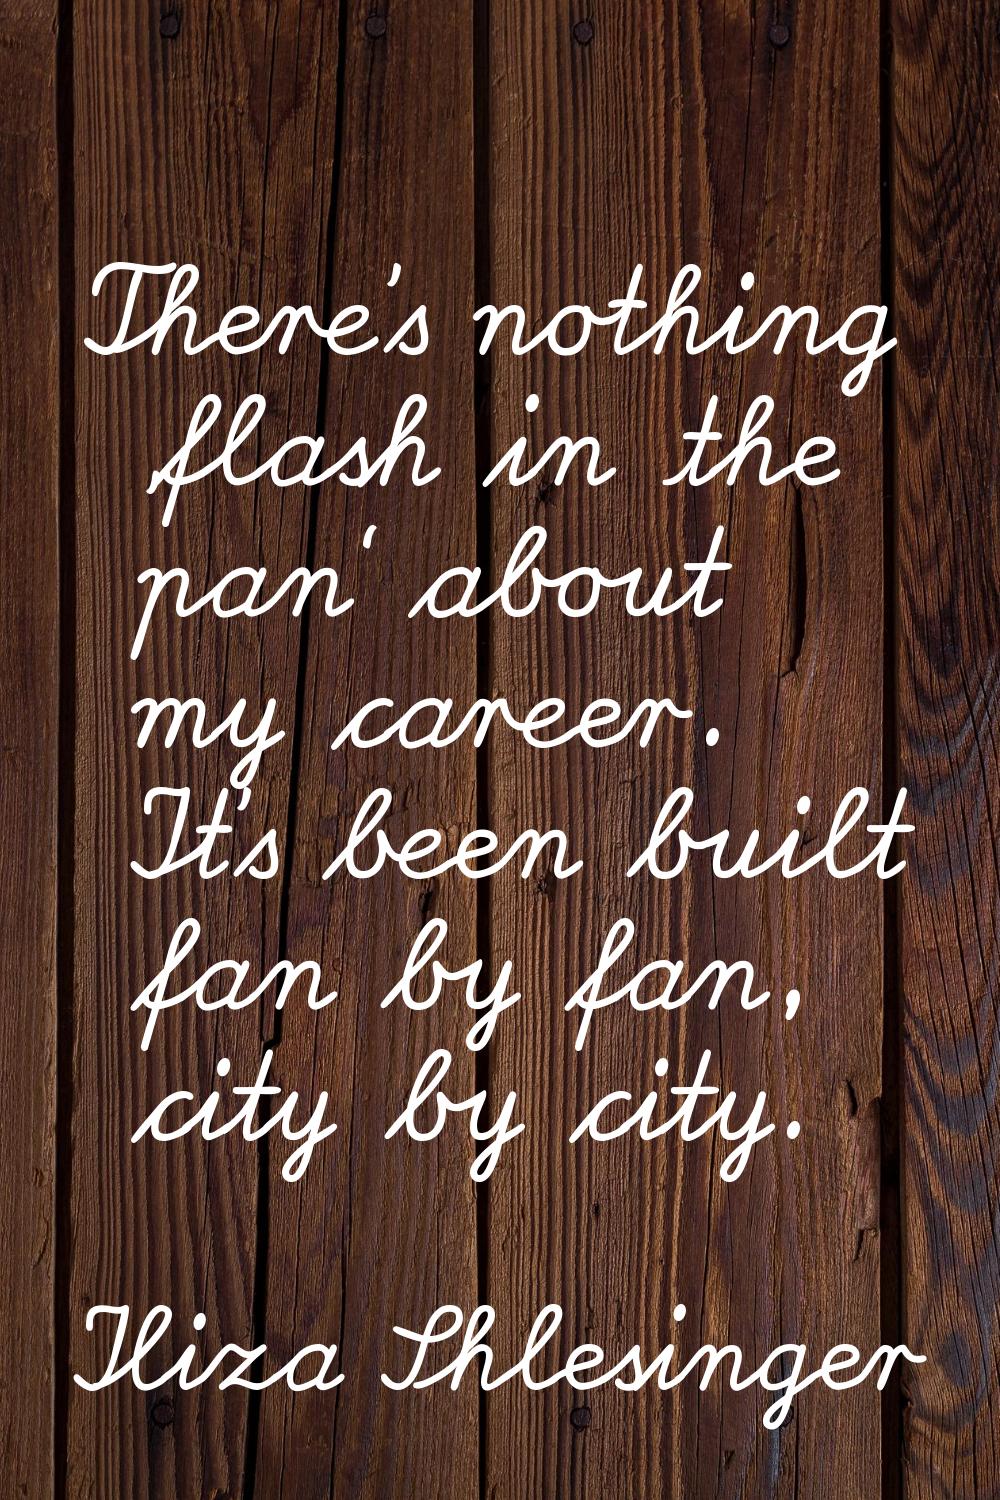 There's nothing 'flash in the pan' about my career. It's been built fan by fan, city by city.